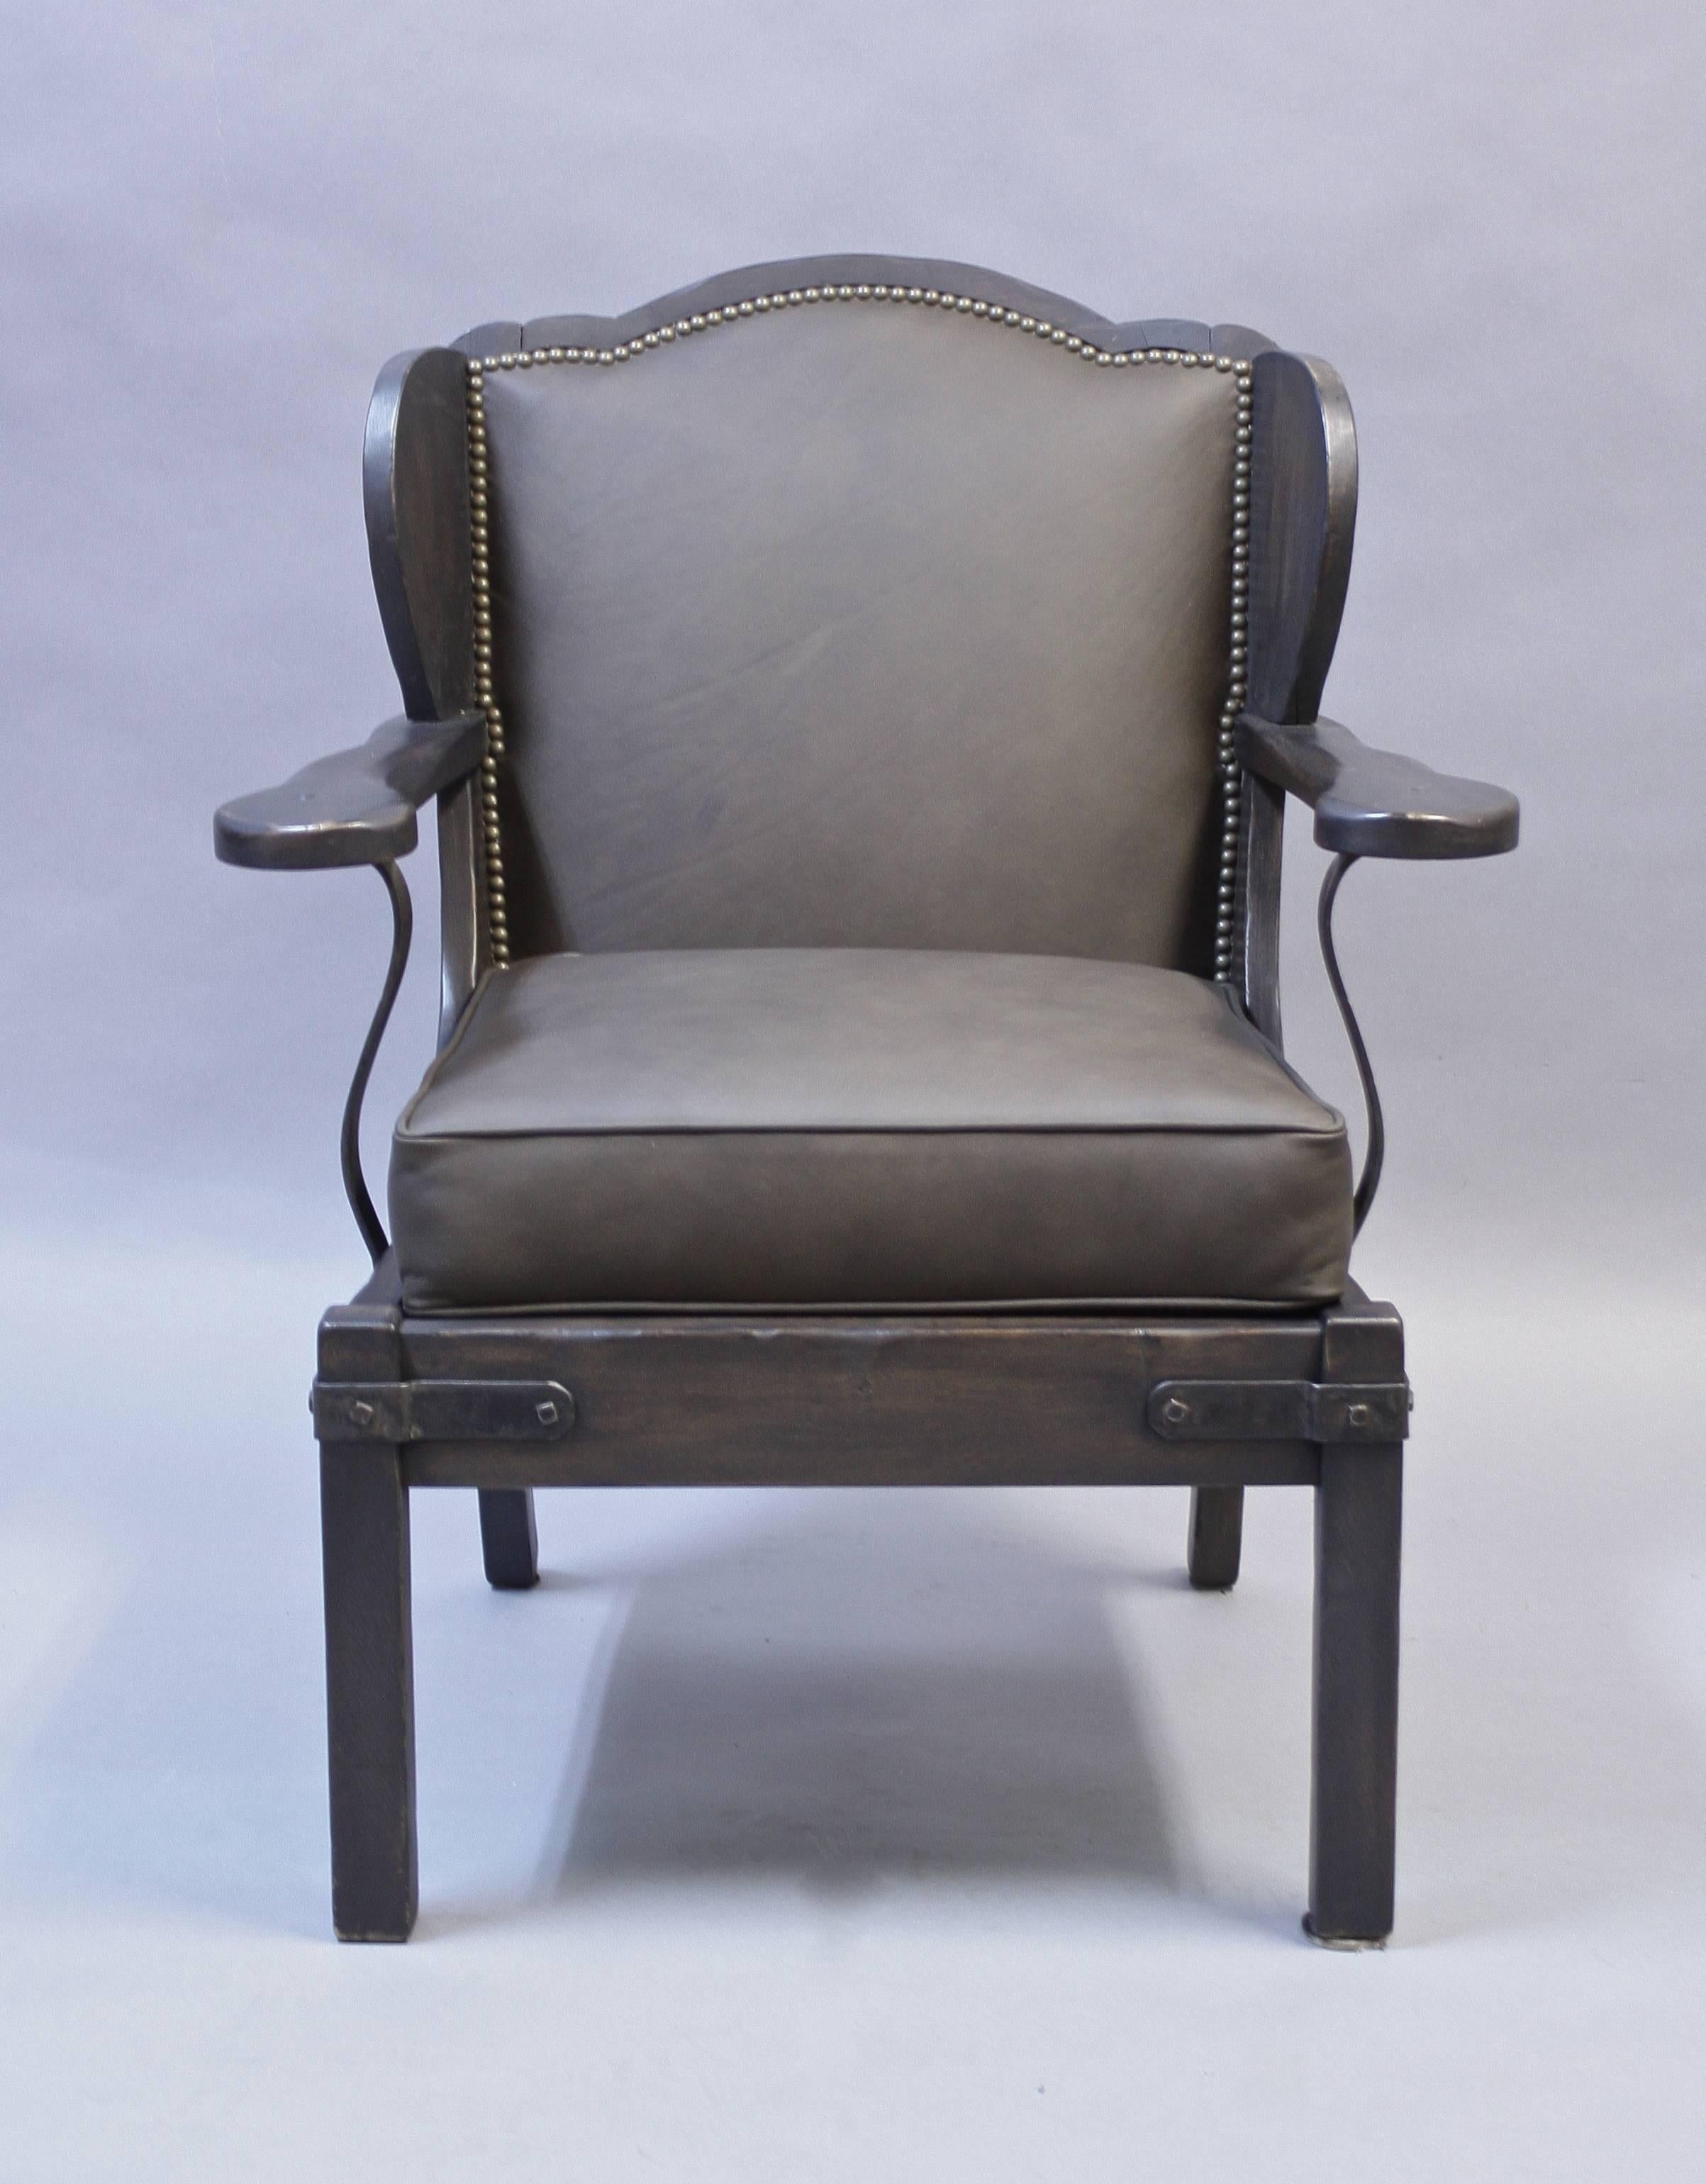 Handsome armchair with new leather upholstery and restored finish. Iron strapping. Measures: 35" H x 29.5" W x 29.25" D x 20" seat height.